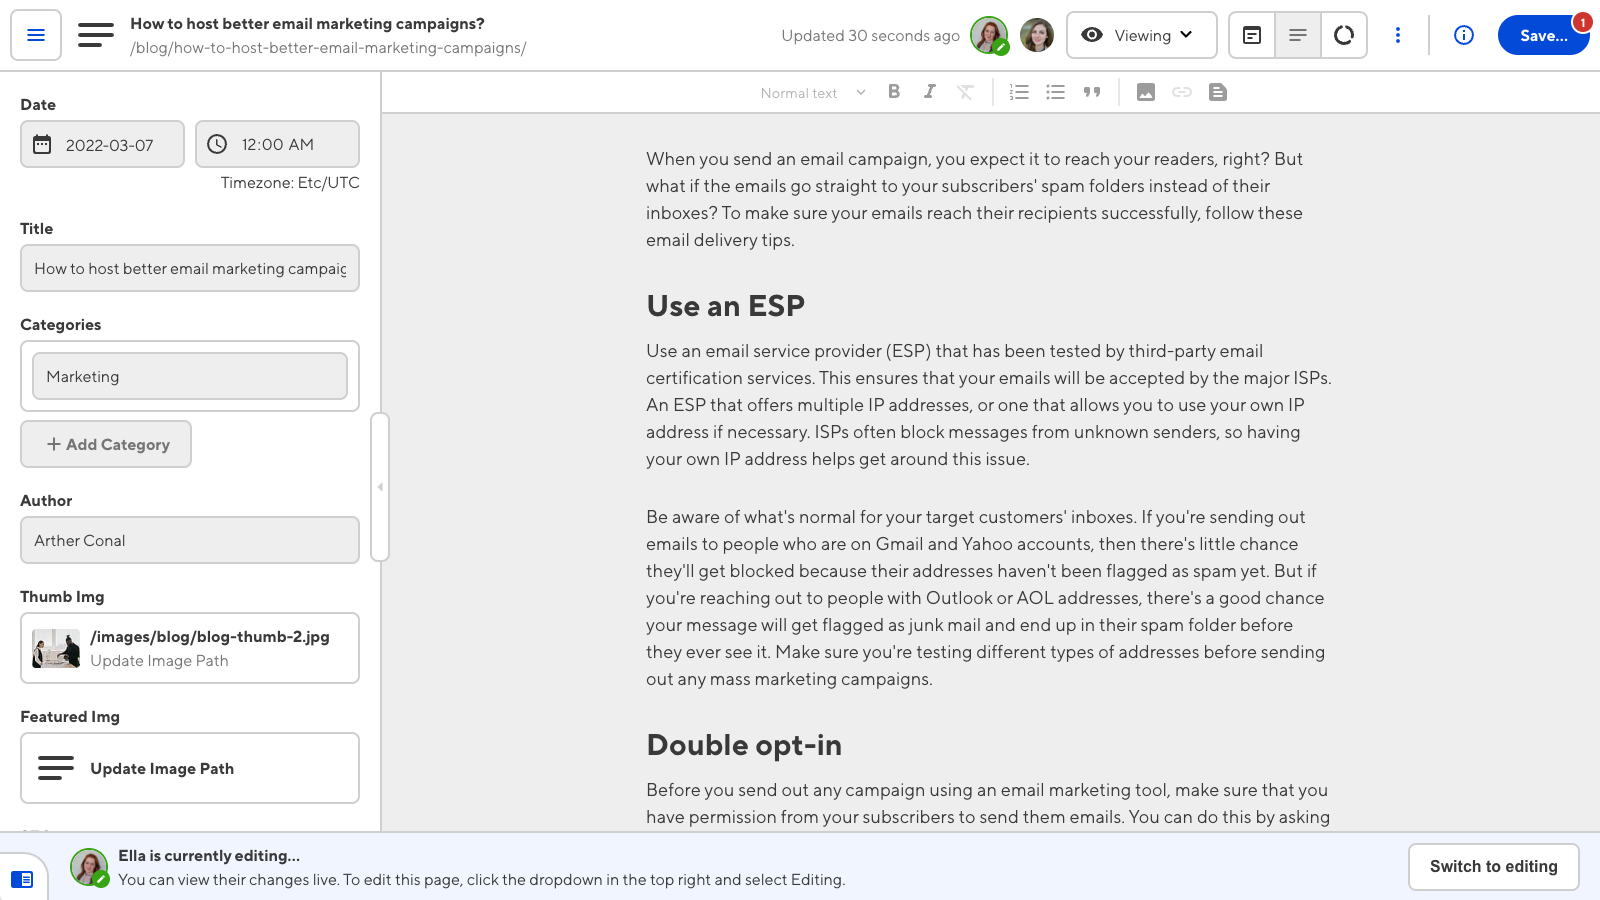 A screenshot of the Content Editor in read-only mode, with a banner at the bottom to switch to editing.